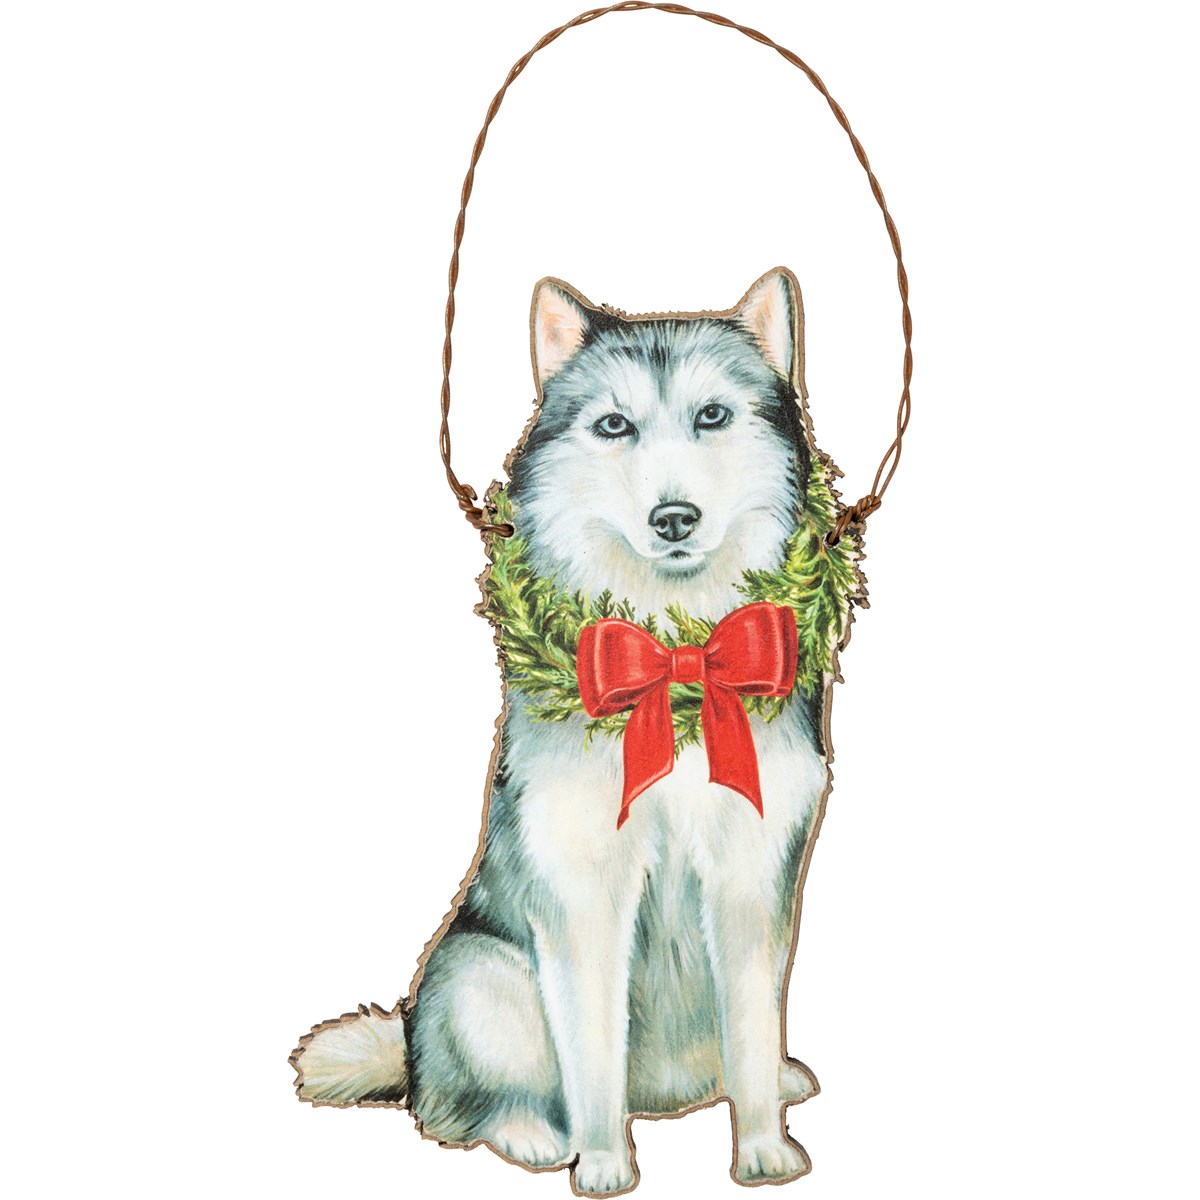 Christmas Husky Ornament - Wood, Paper, Wire